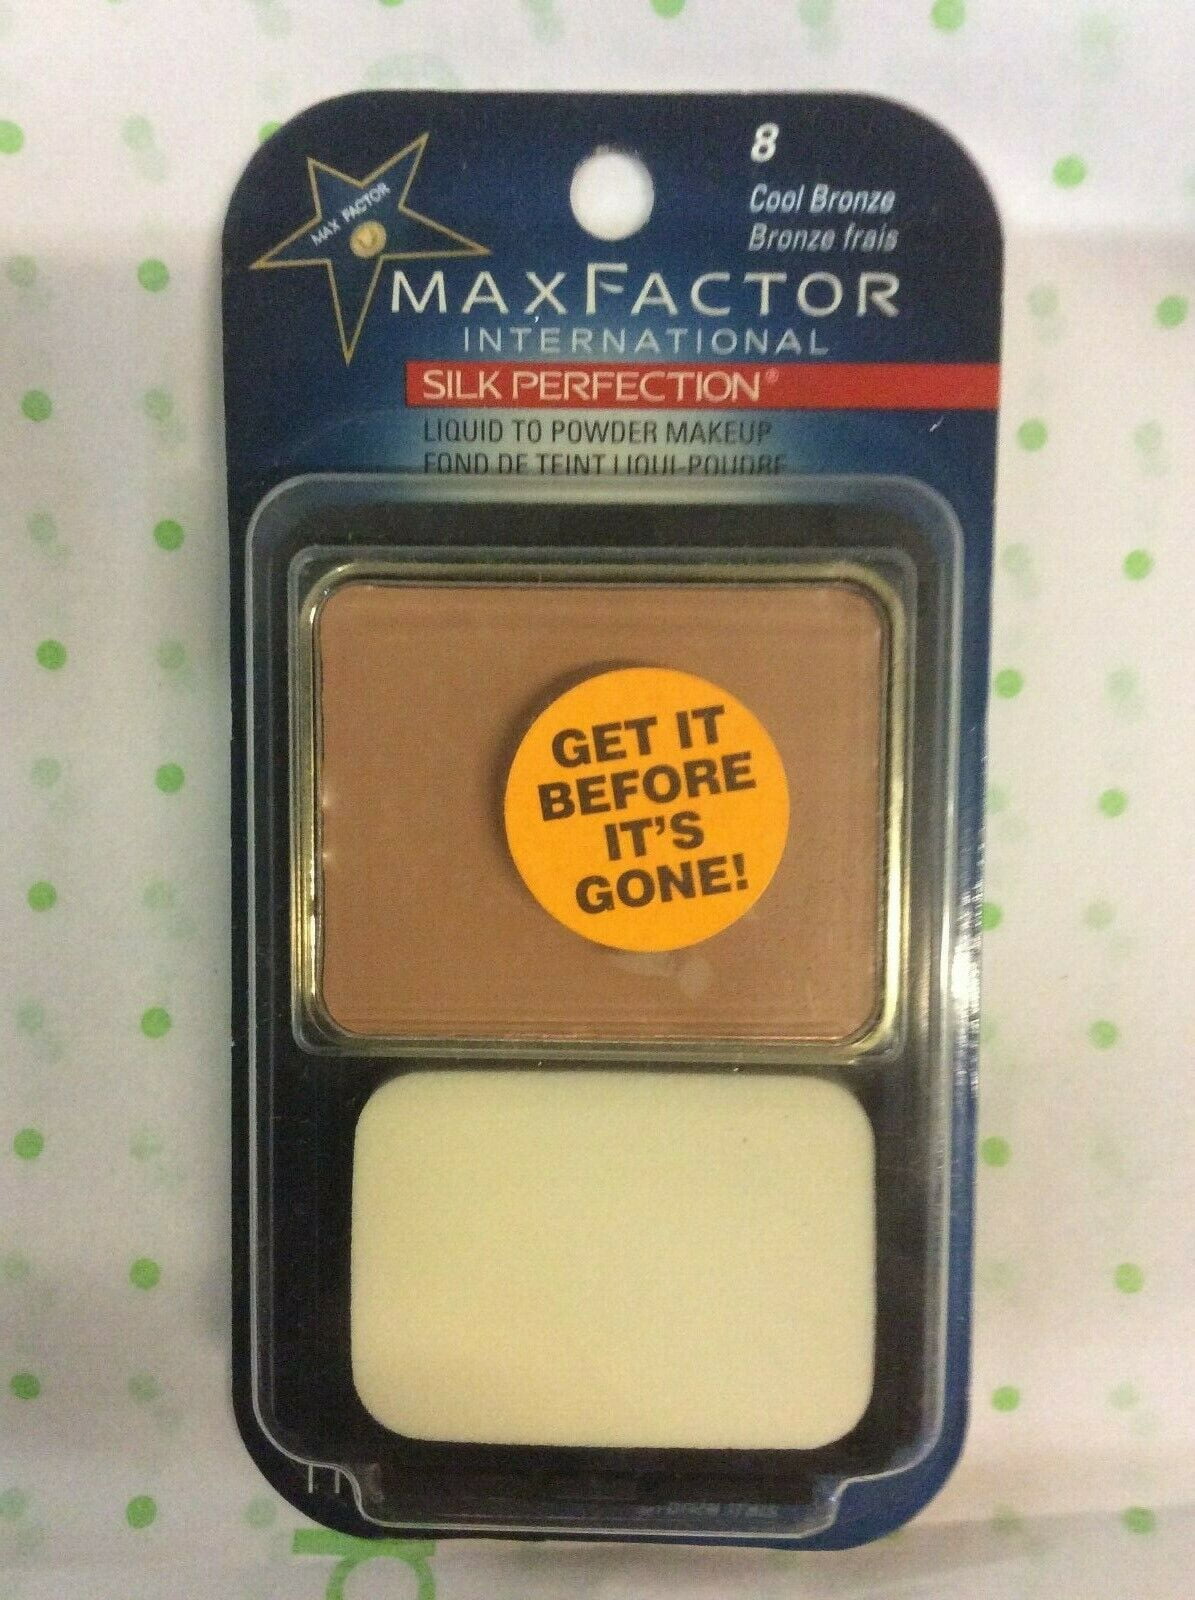 OLD PACKAGE - Max Factor Silk Perfection Foundation - Cool Bronze 008 NEW - Walmart.com